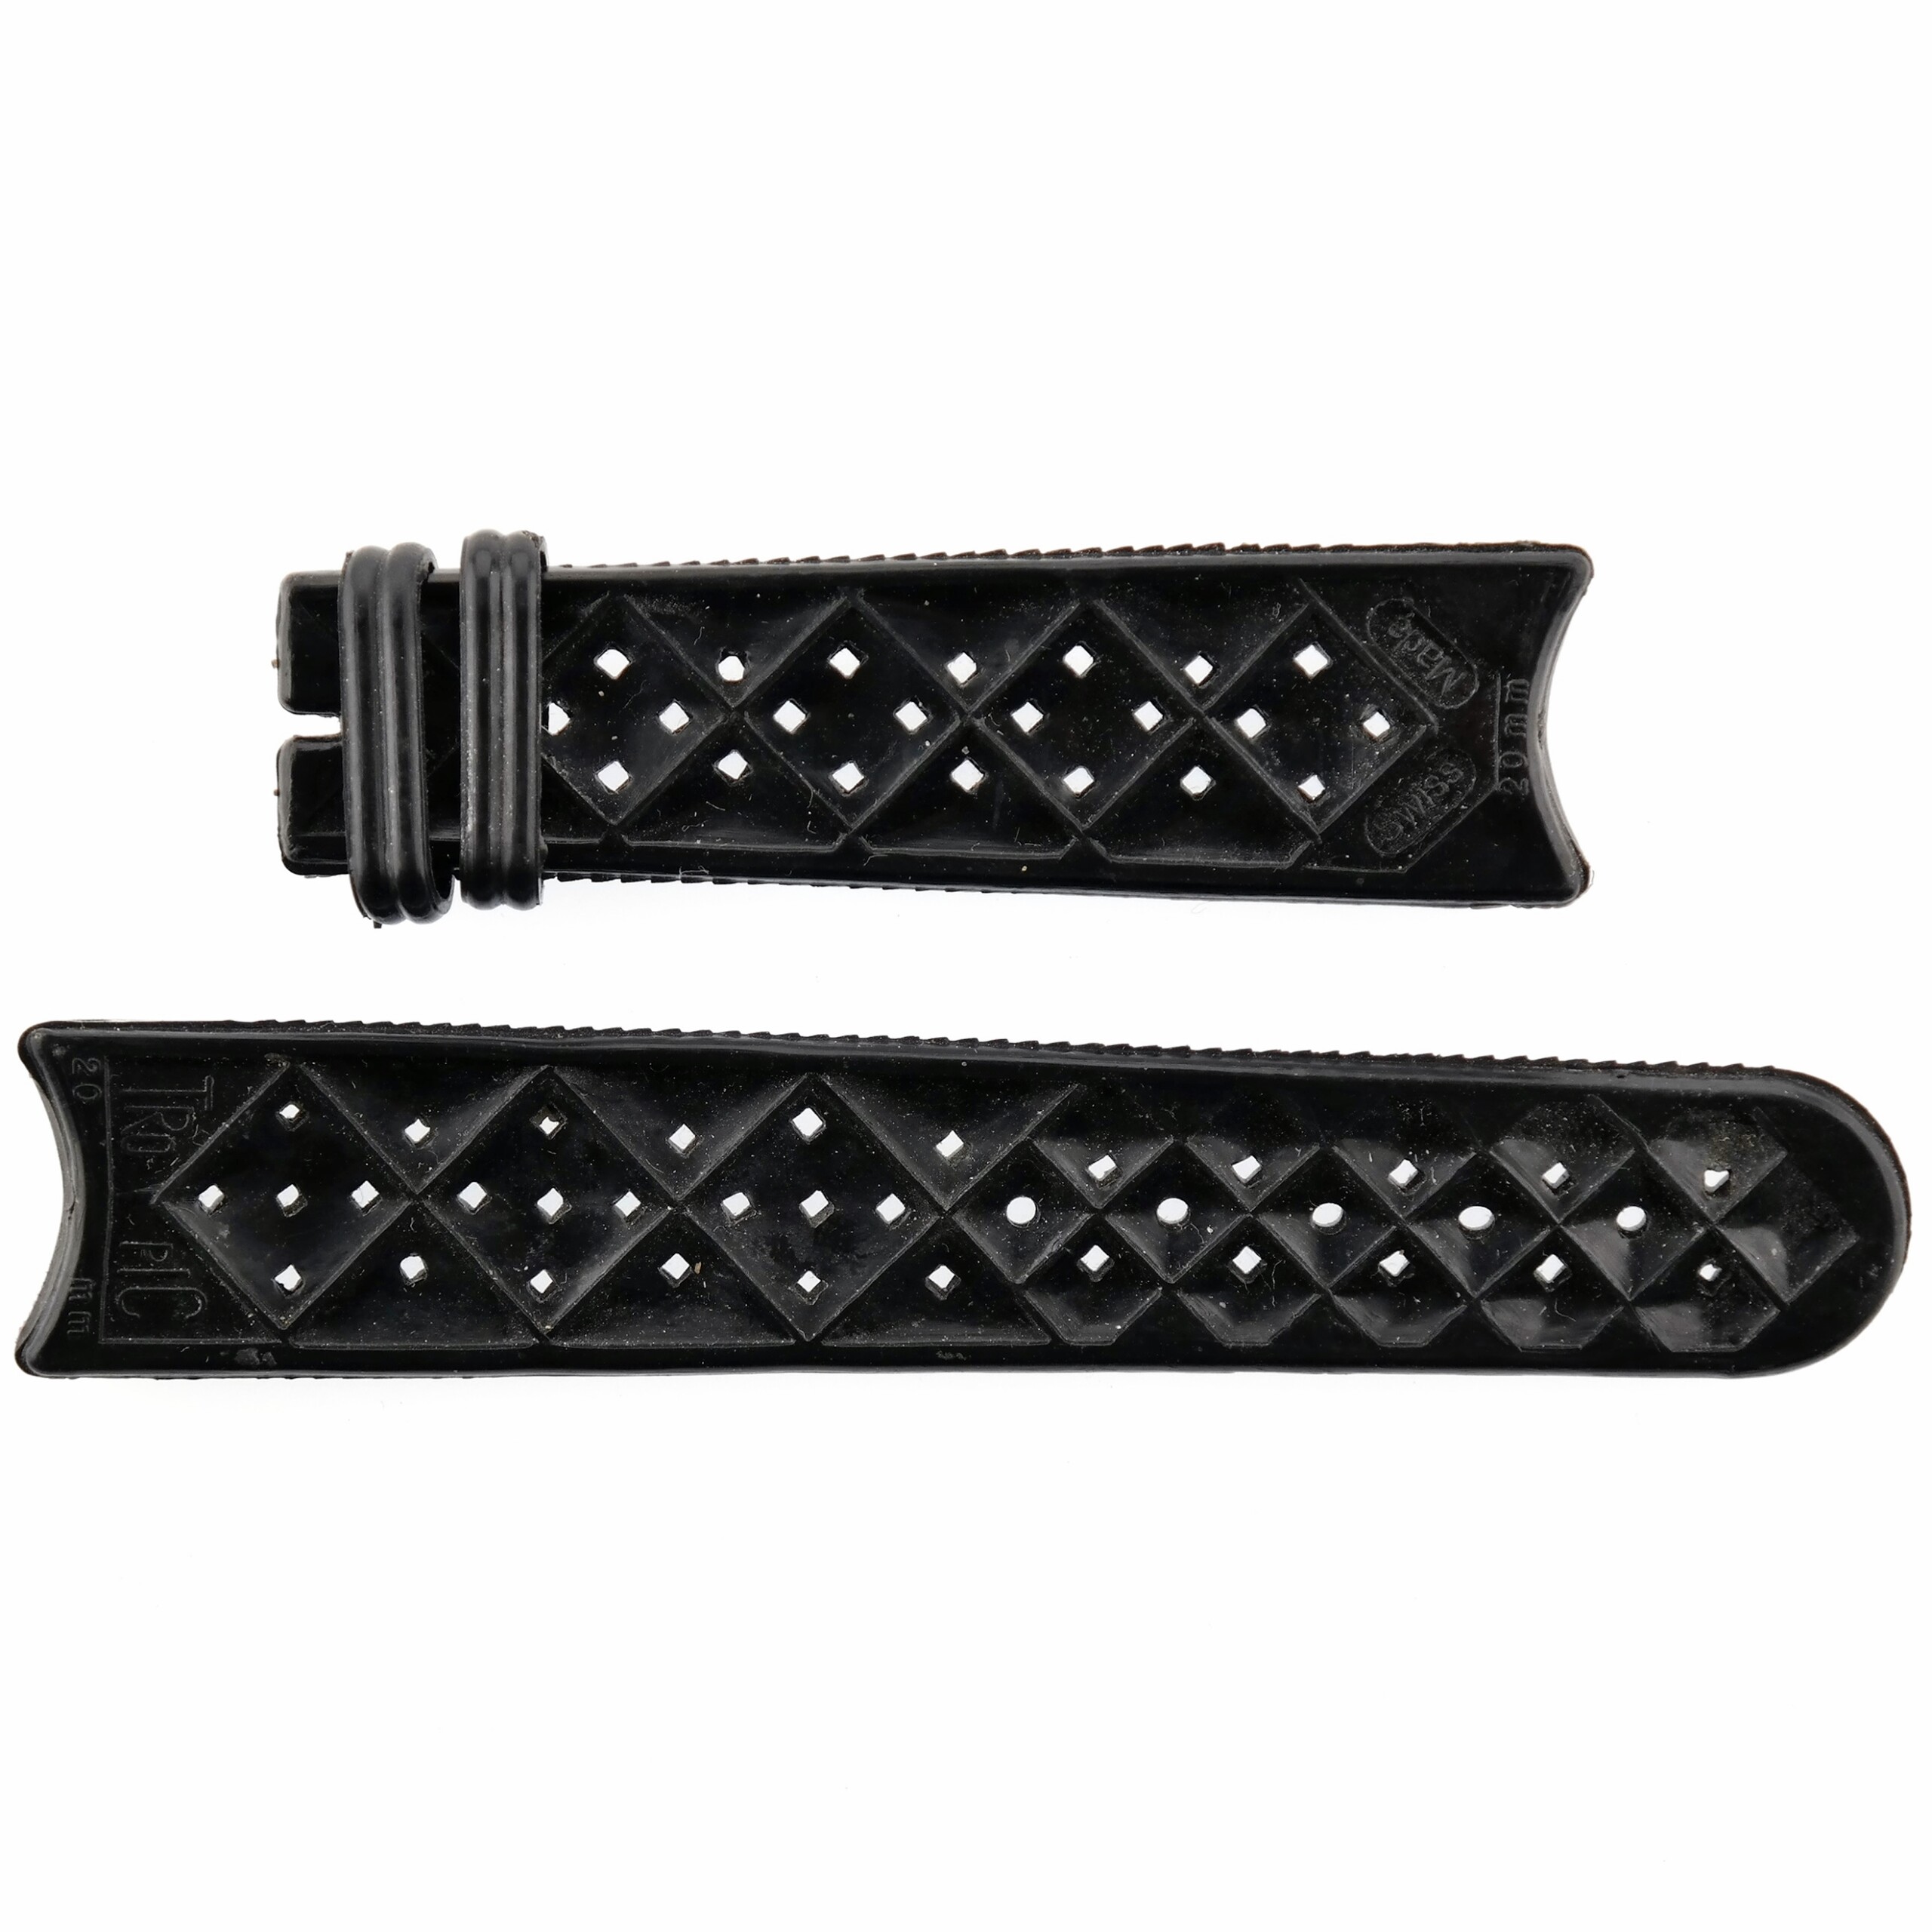 Vintage BESTFIT TROPIC Watch Strap - Curved Ends - 20 mm - Black - Swiss Made